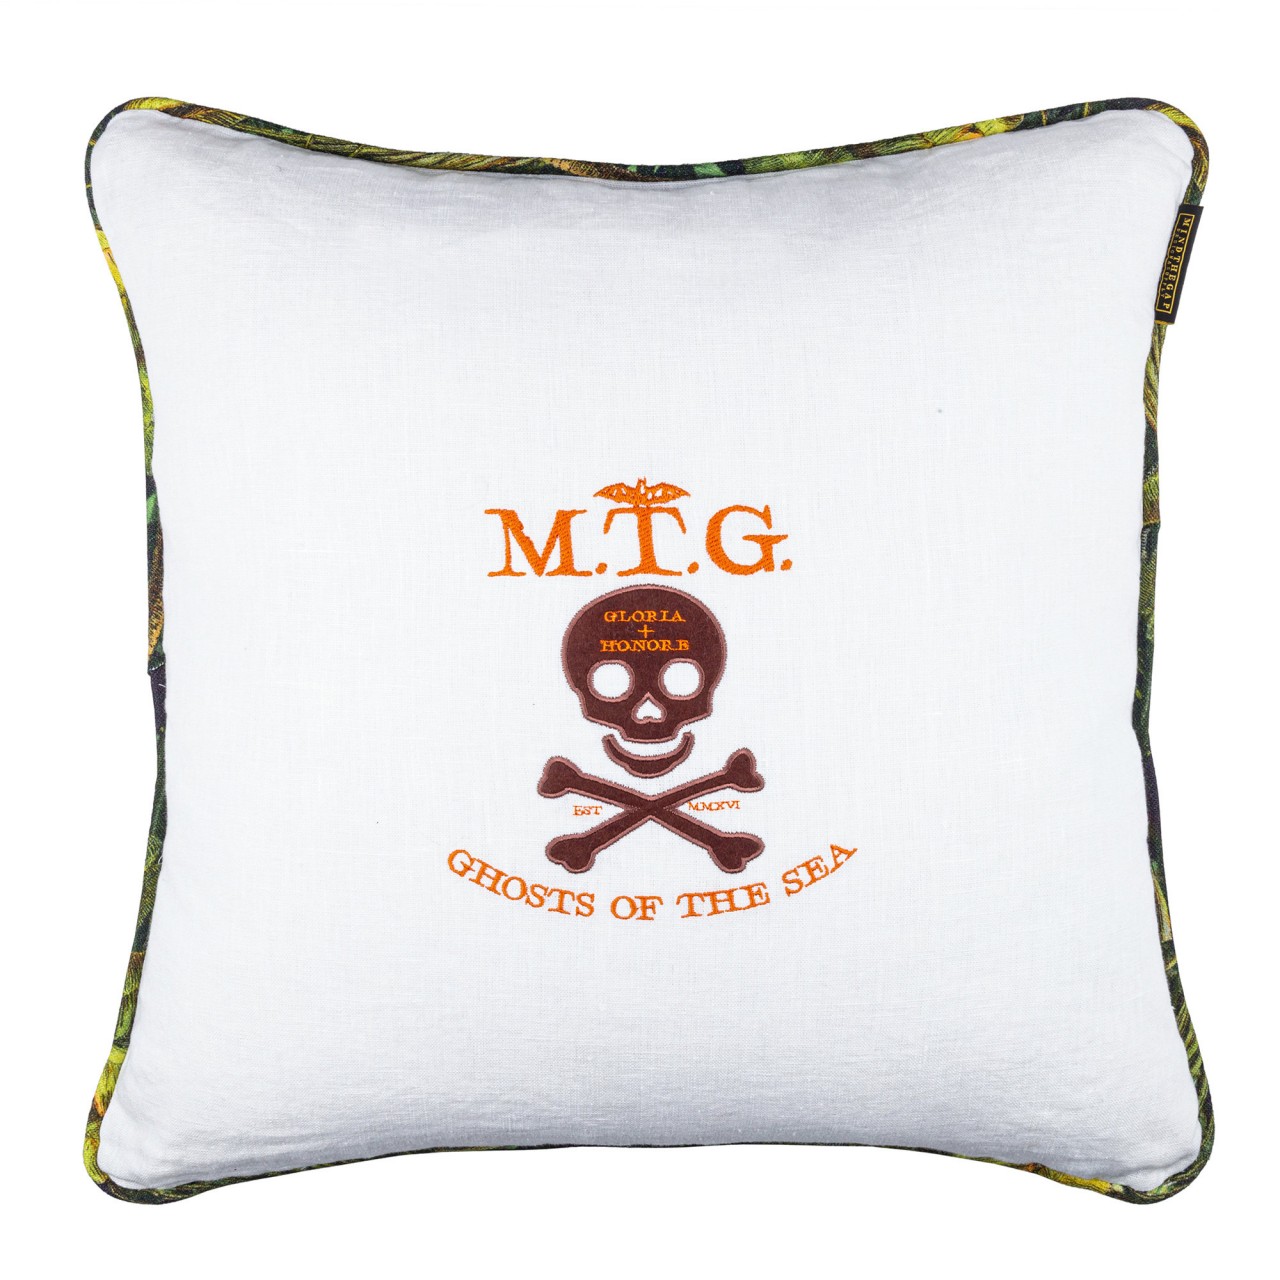 GHOST OF THE SEA Cushion